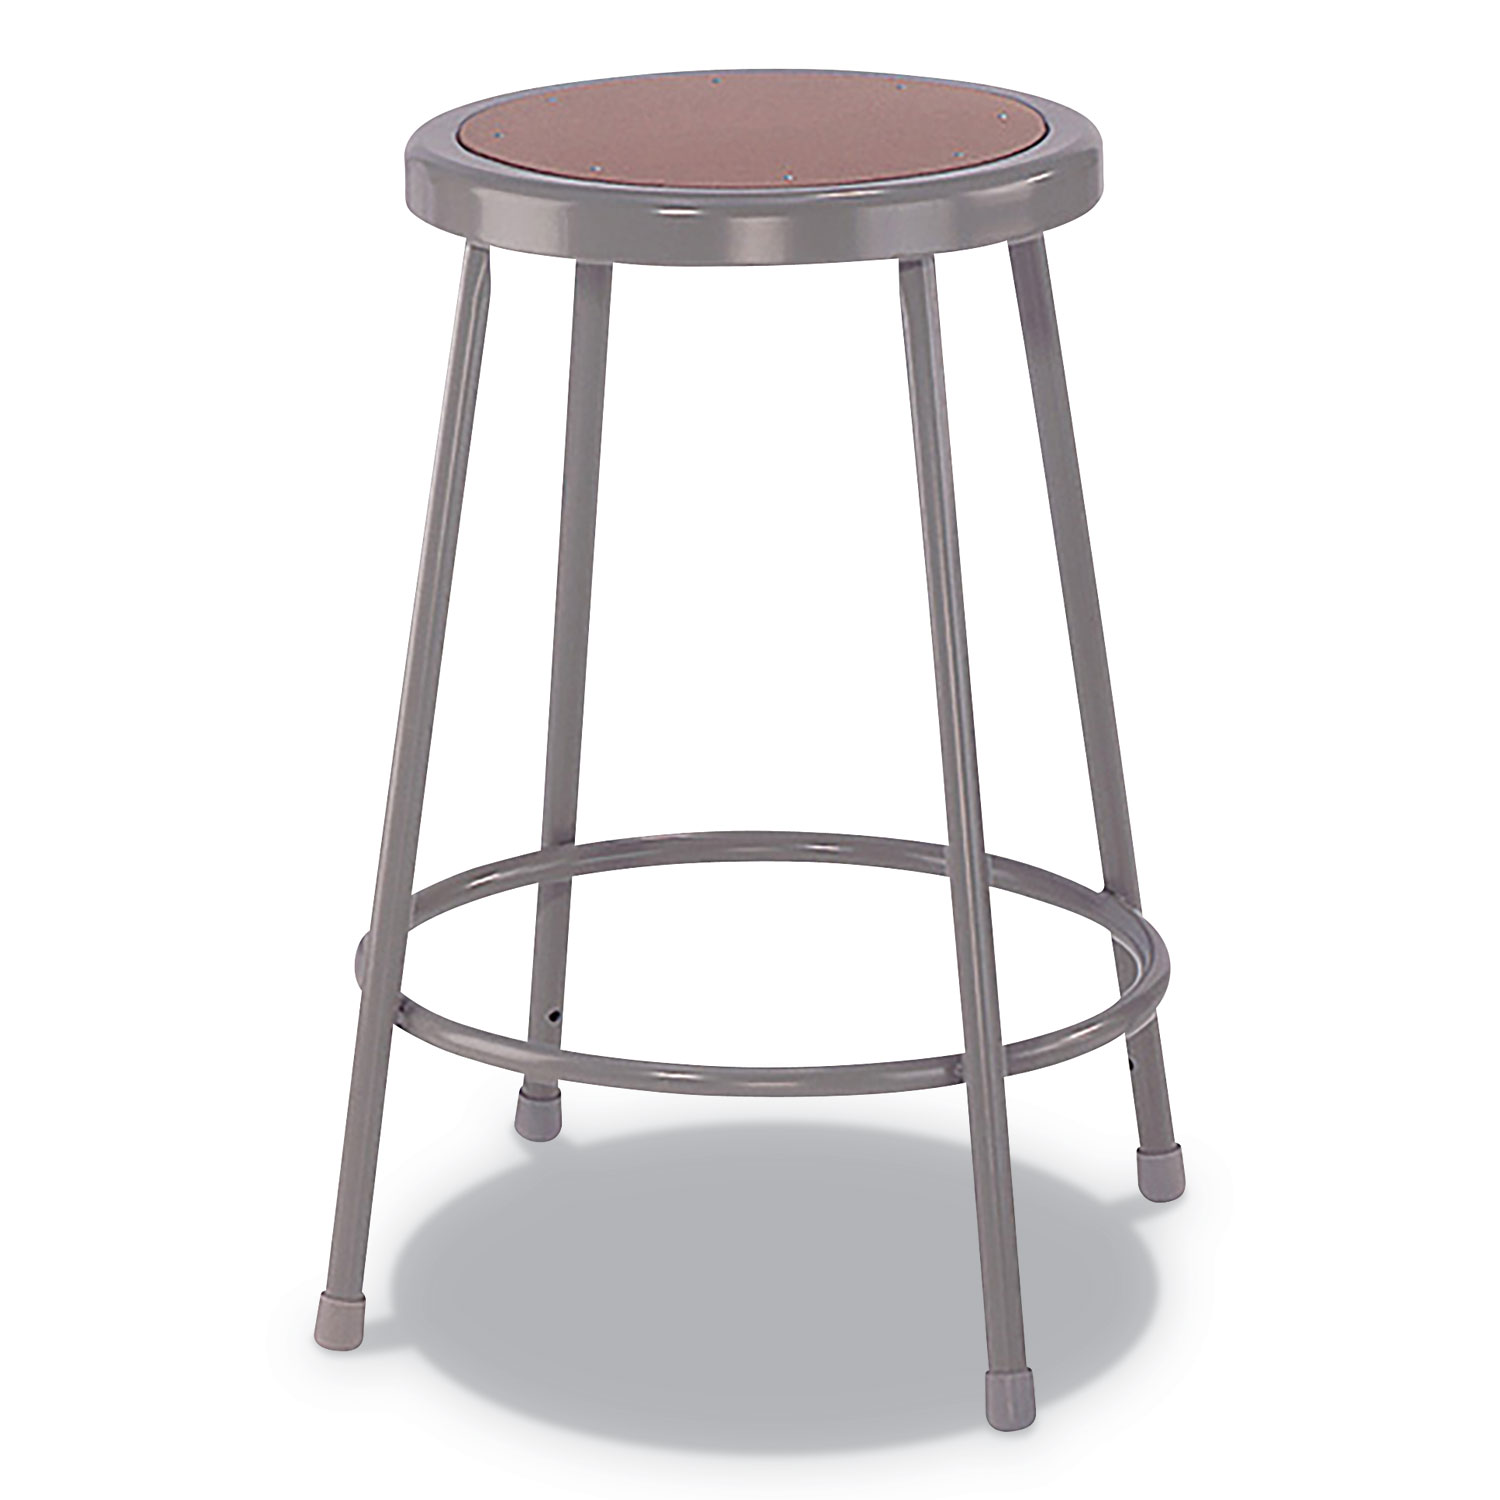  Alera ALEIS6624G Industrial Metal Shop Stool, 24 Seat Height, Supports up to 300 lbs., Brown Seat/Gray Back, Gray Base (ALEIS6624G) 